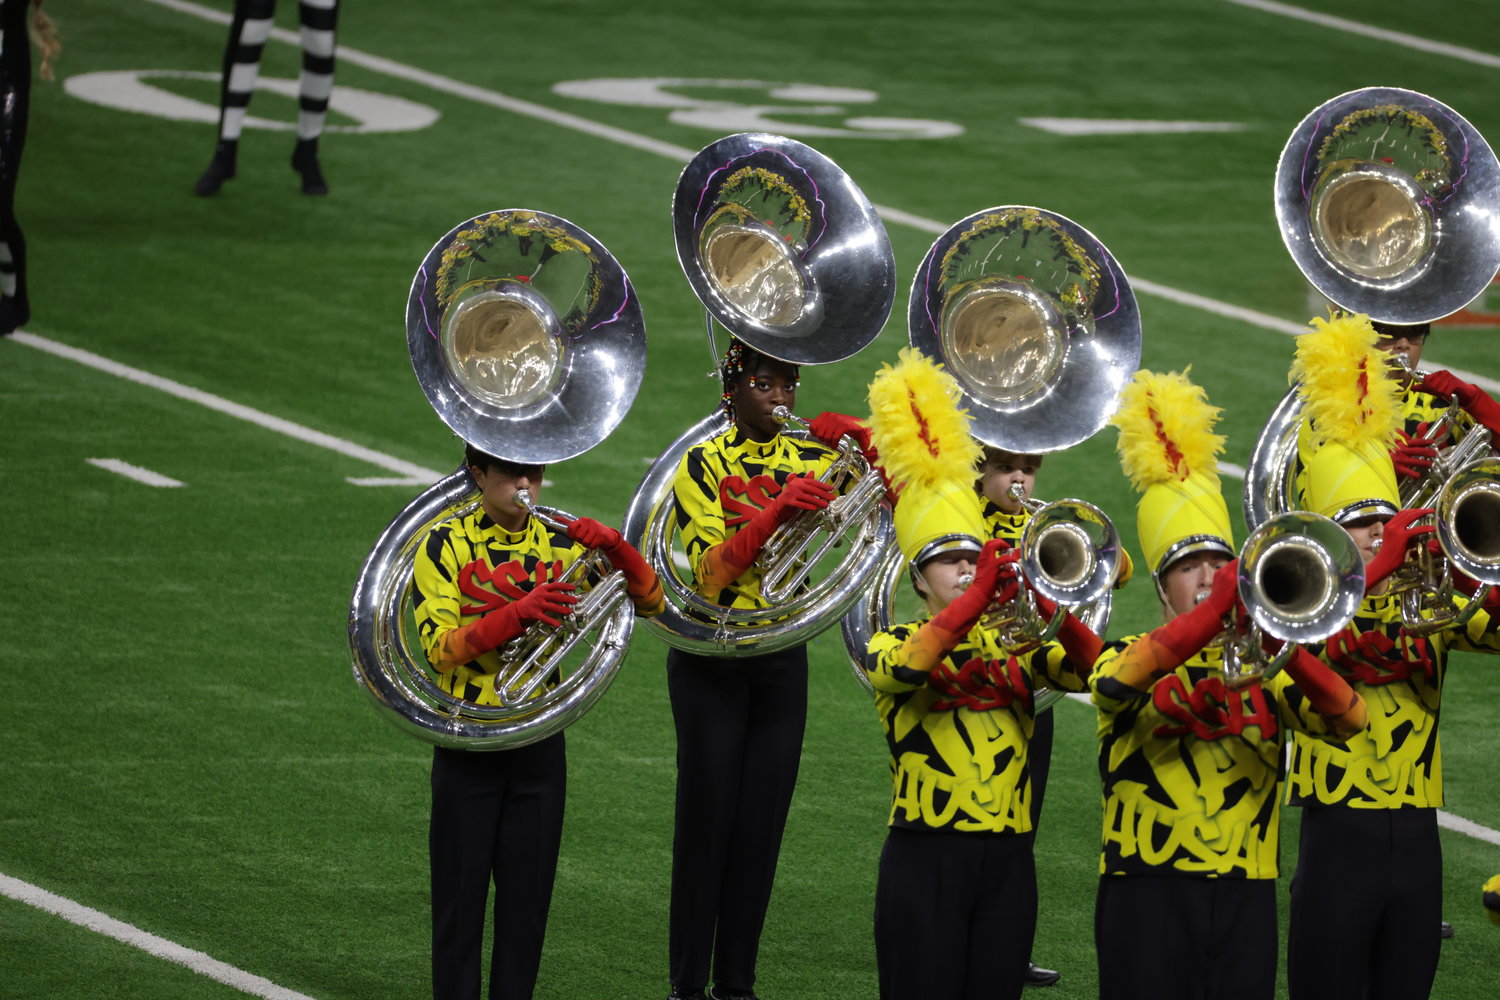 The Seven Lakes High School Spartan Band performs at the University Interscholastic League State Championships at the Alamodome in San Antonio.